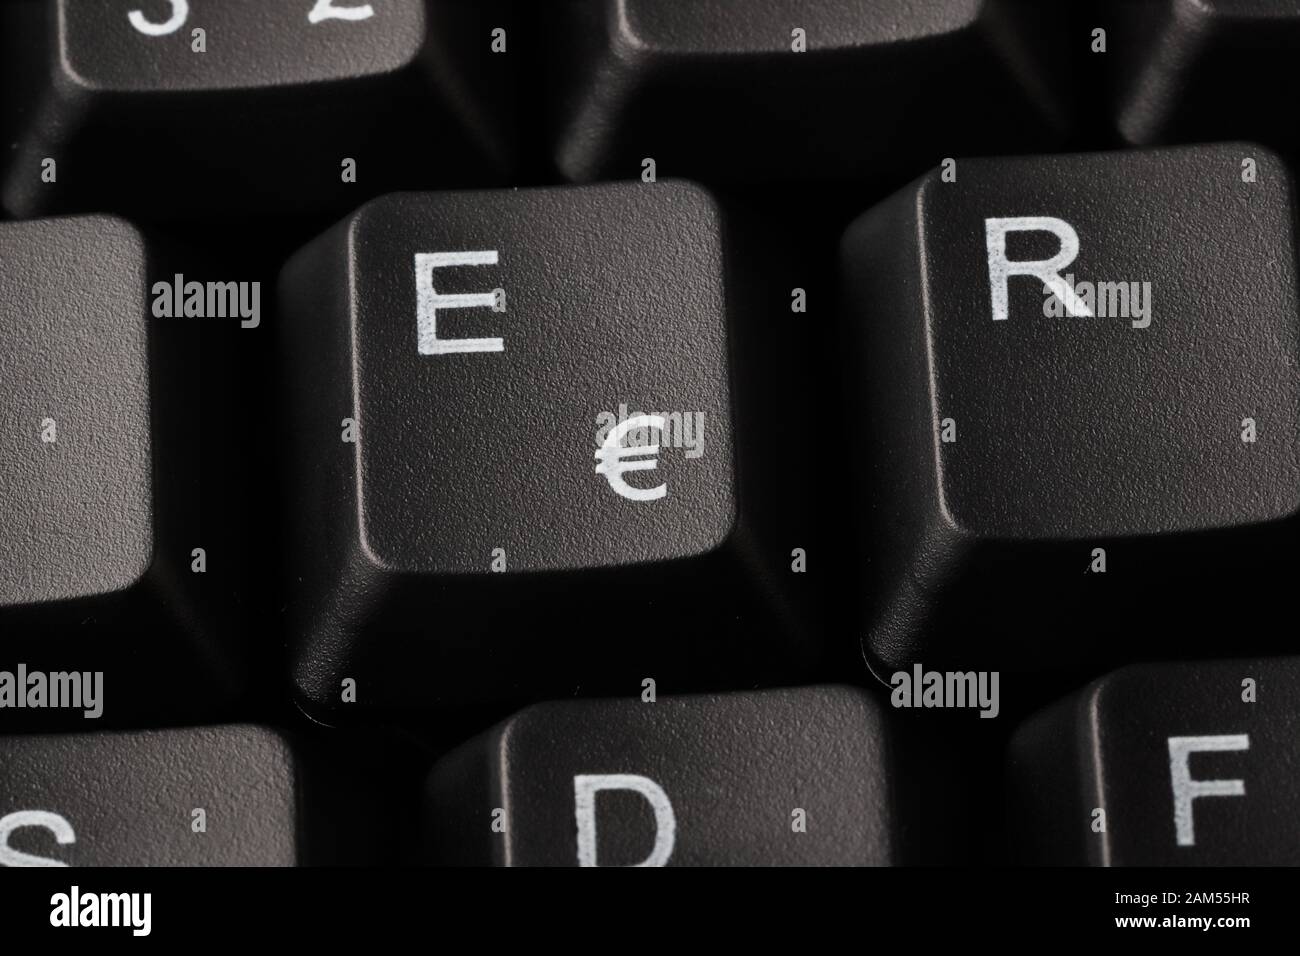 Close-up view of a computer keyboard with a key printed with the euro currency symbol. Stock Photo